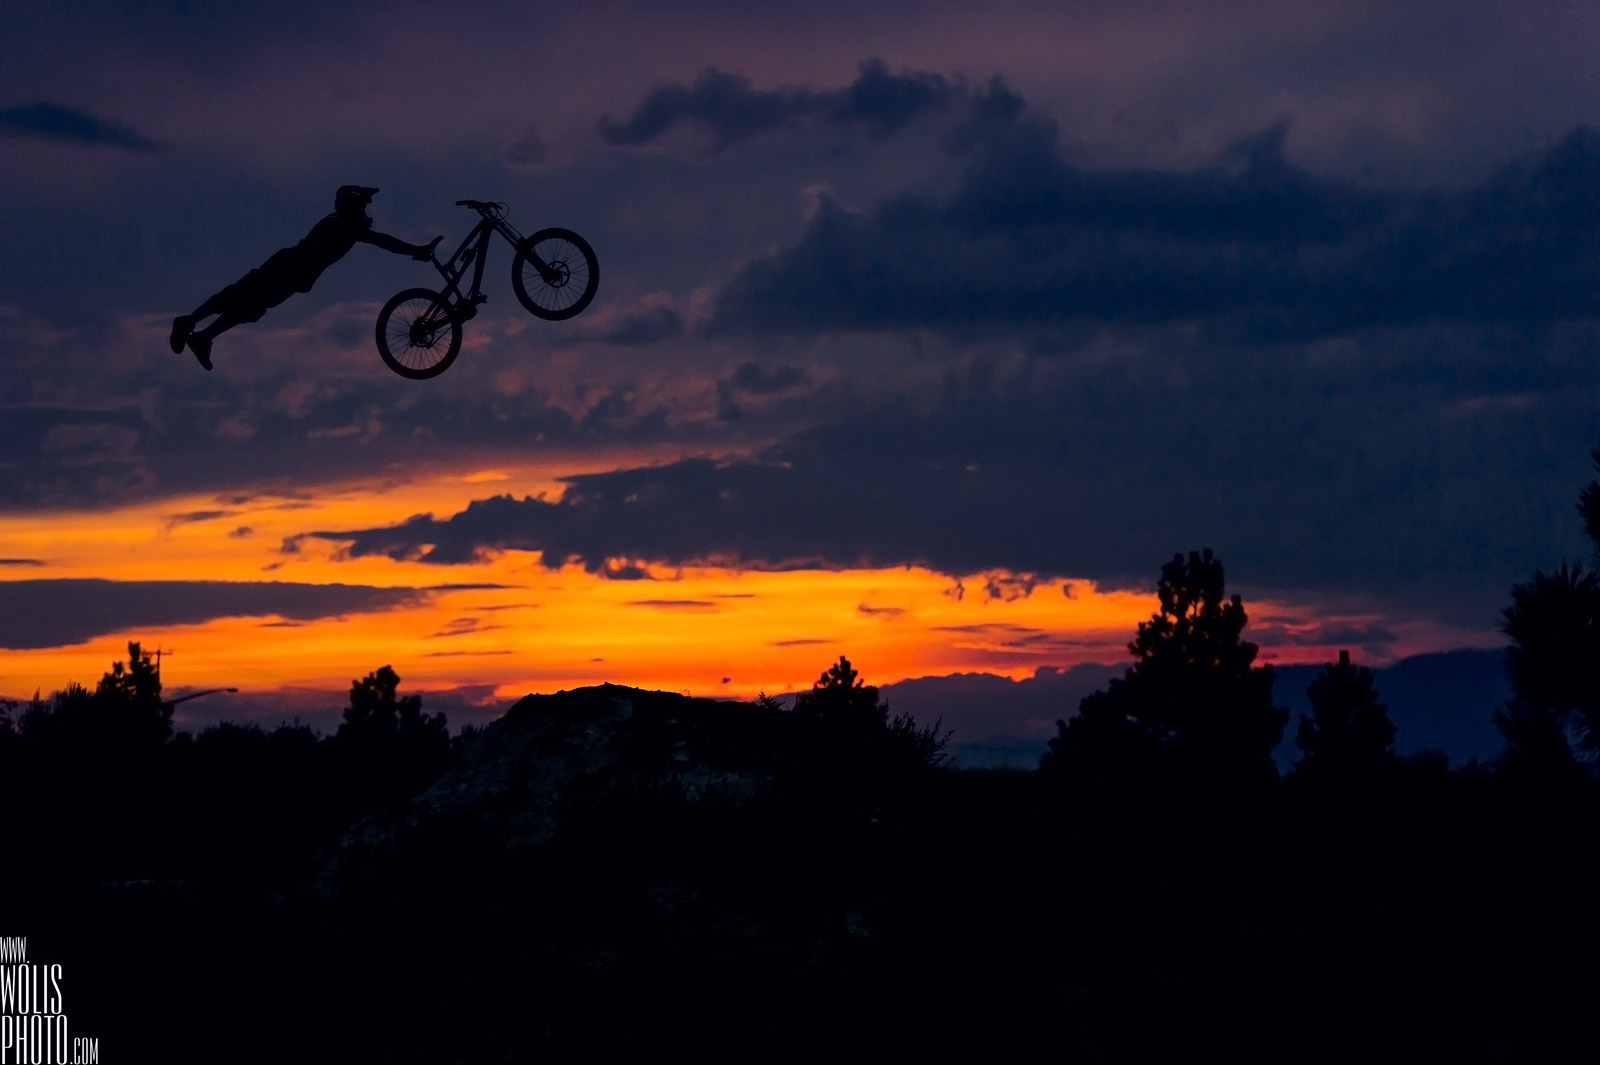 Double grabs in the natural terrain during a sunset like this? Perfect.